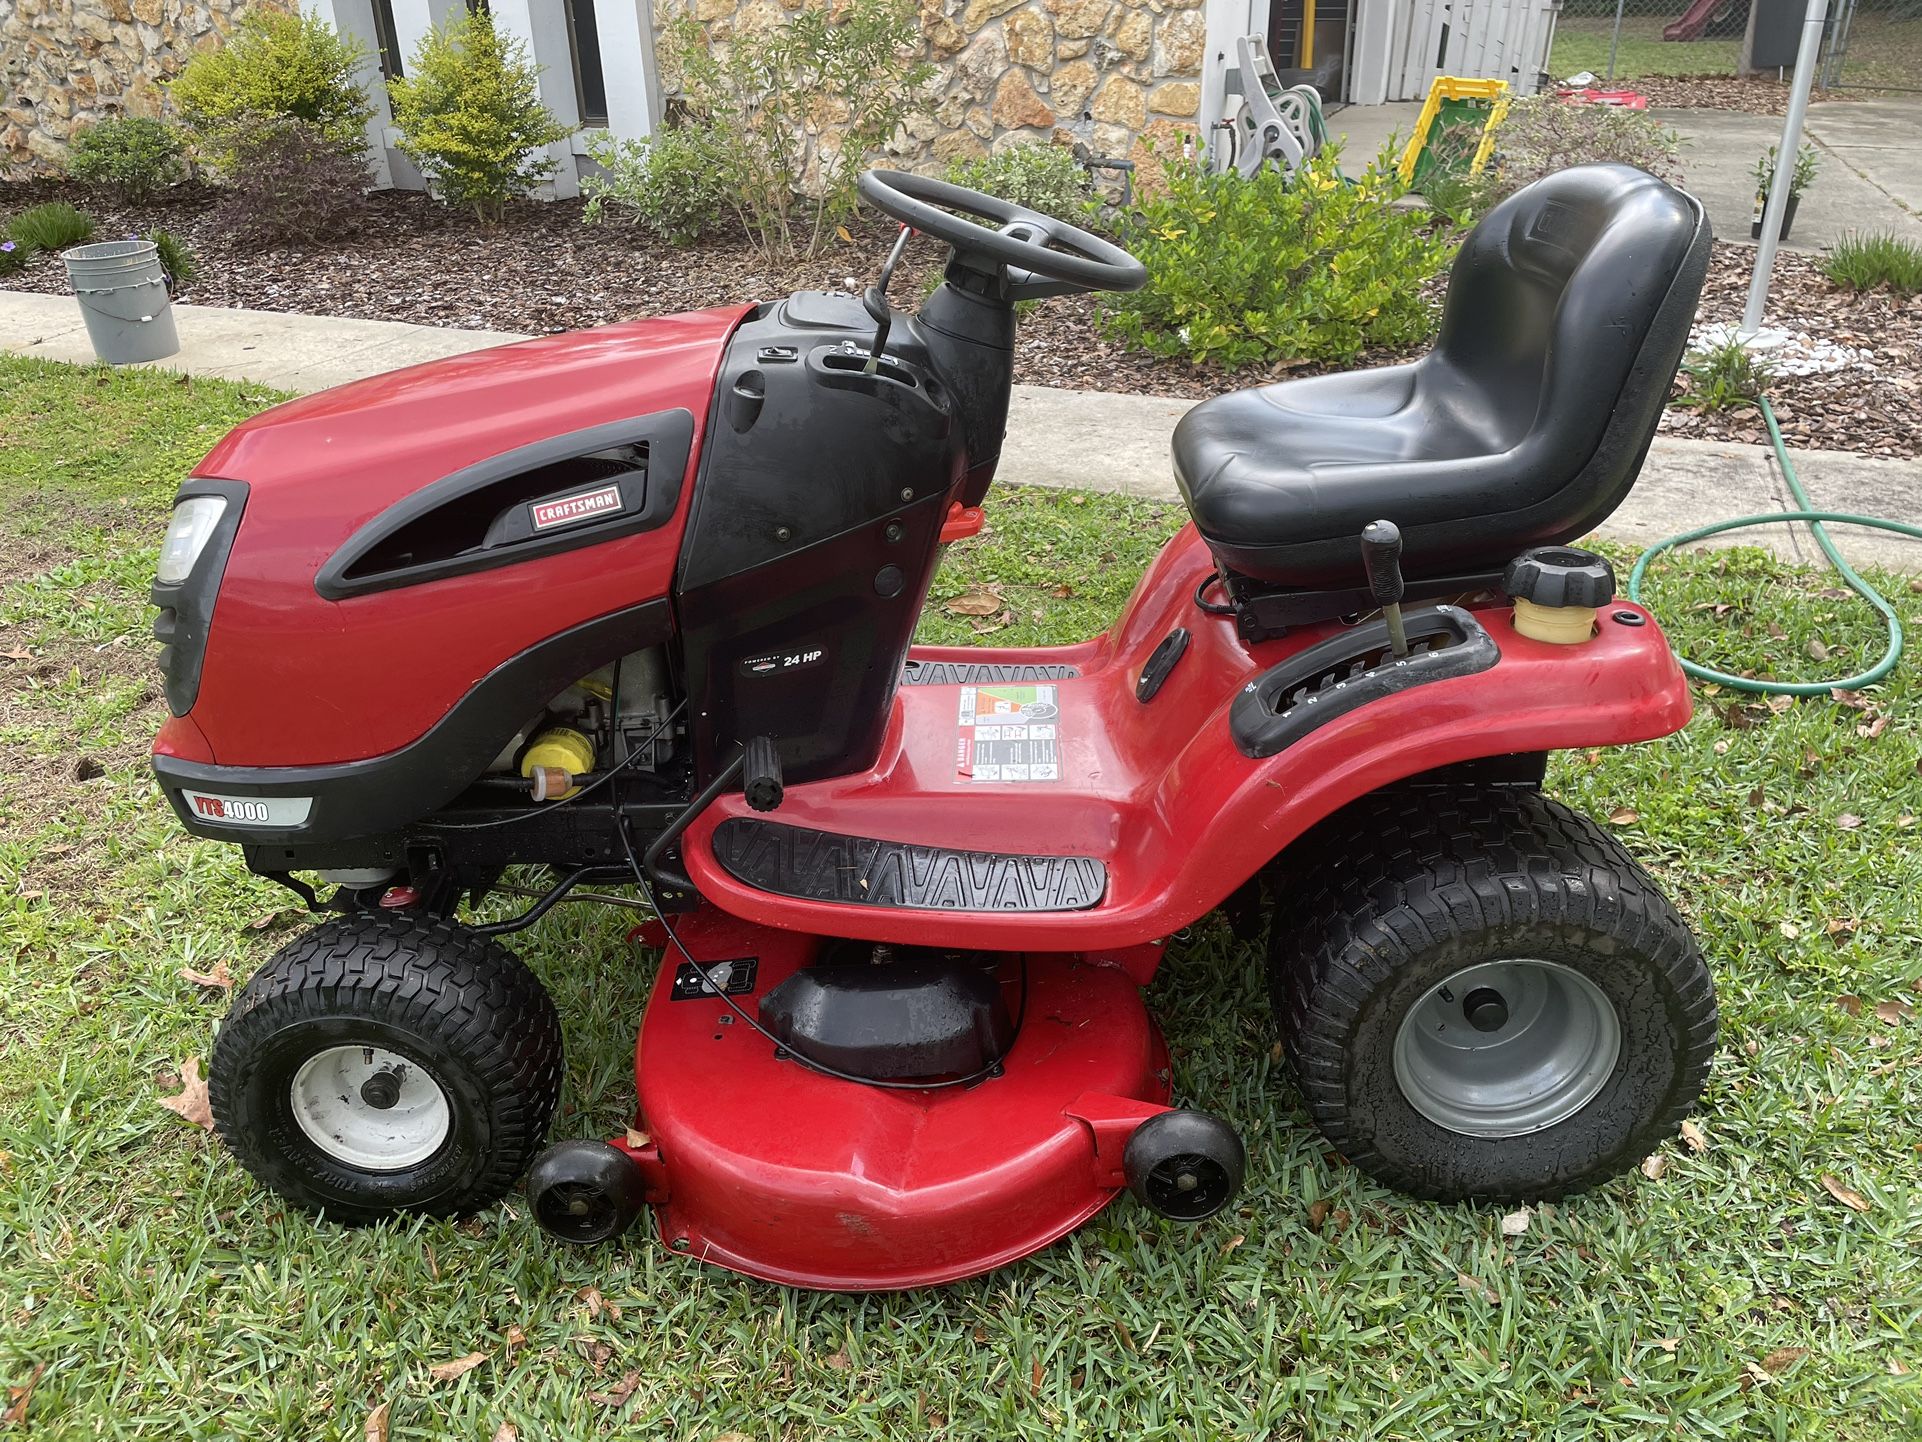 Price REDUCED. MUST SELL! Craftsman Riding Lawn Mower